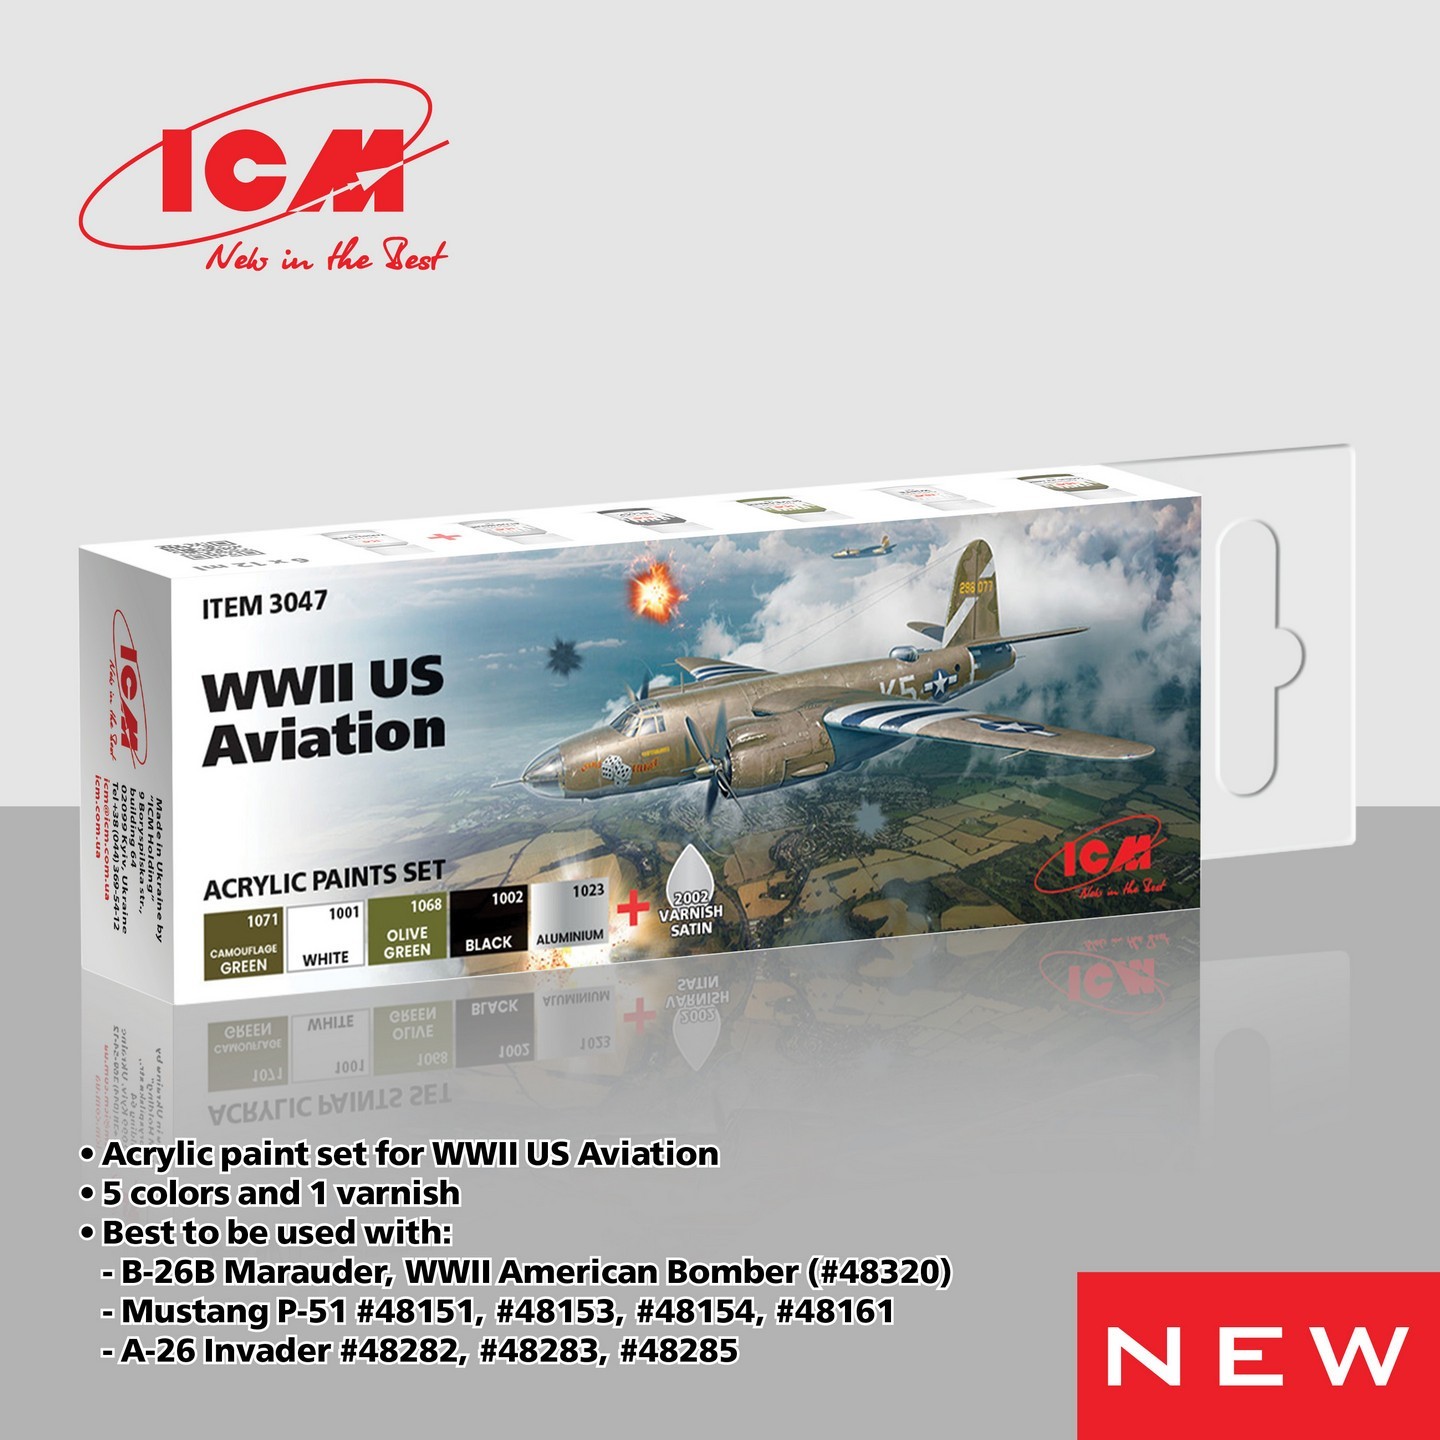 Acrylic paints set for WWII US Aviation